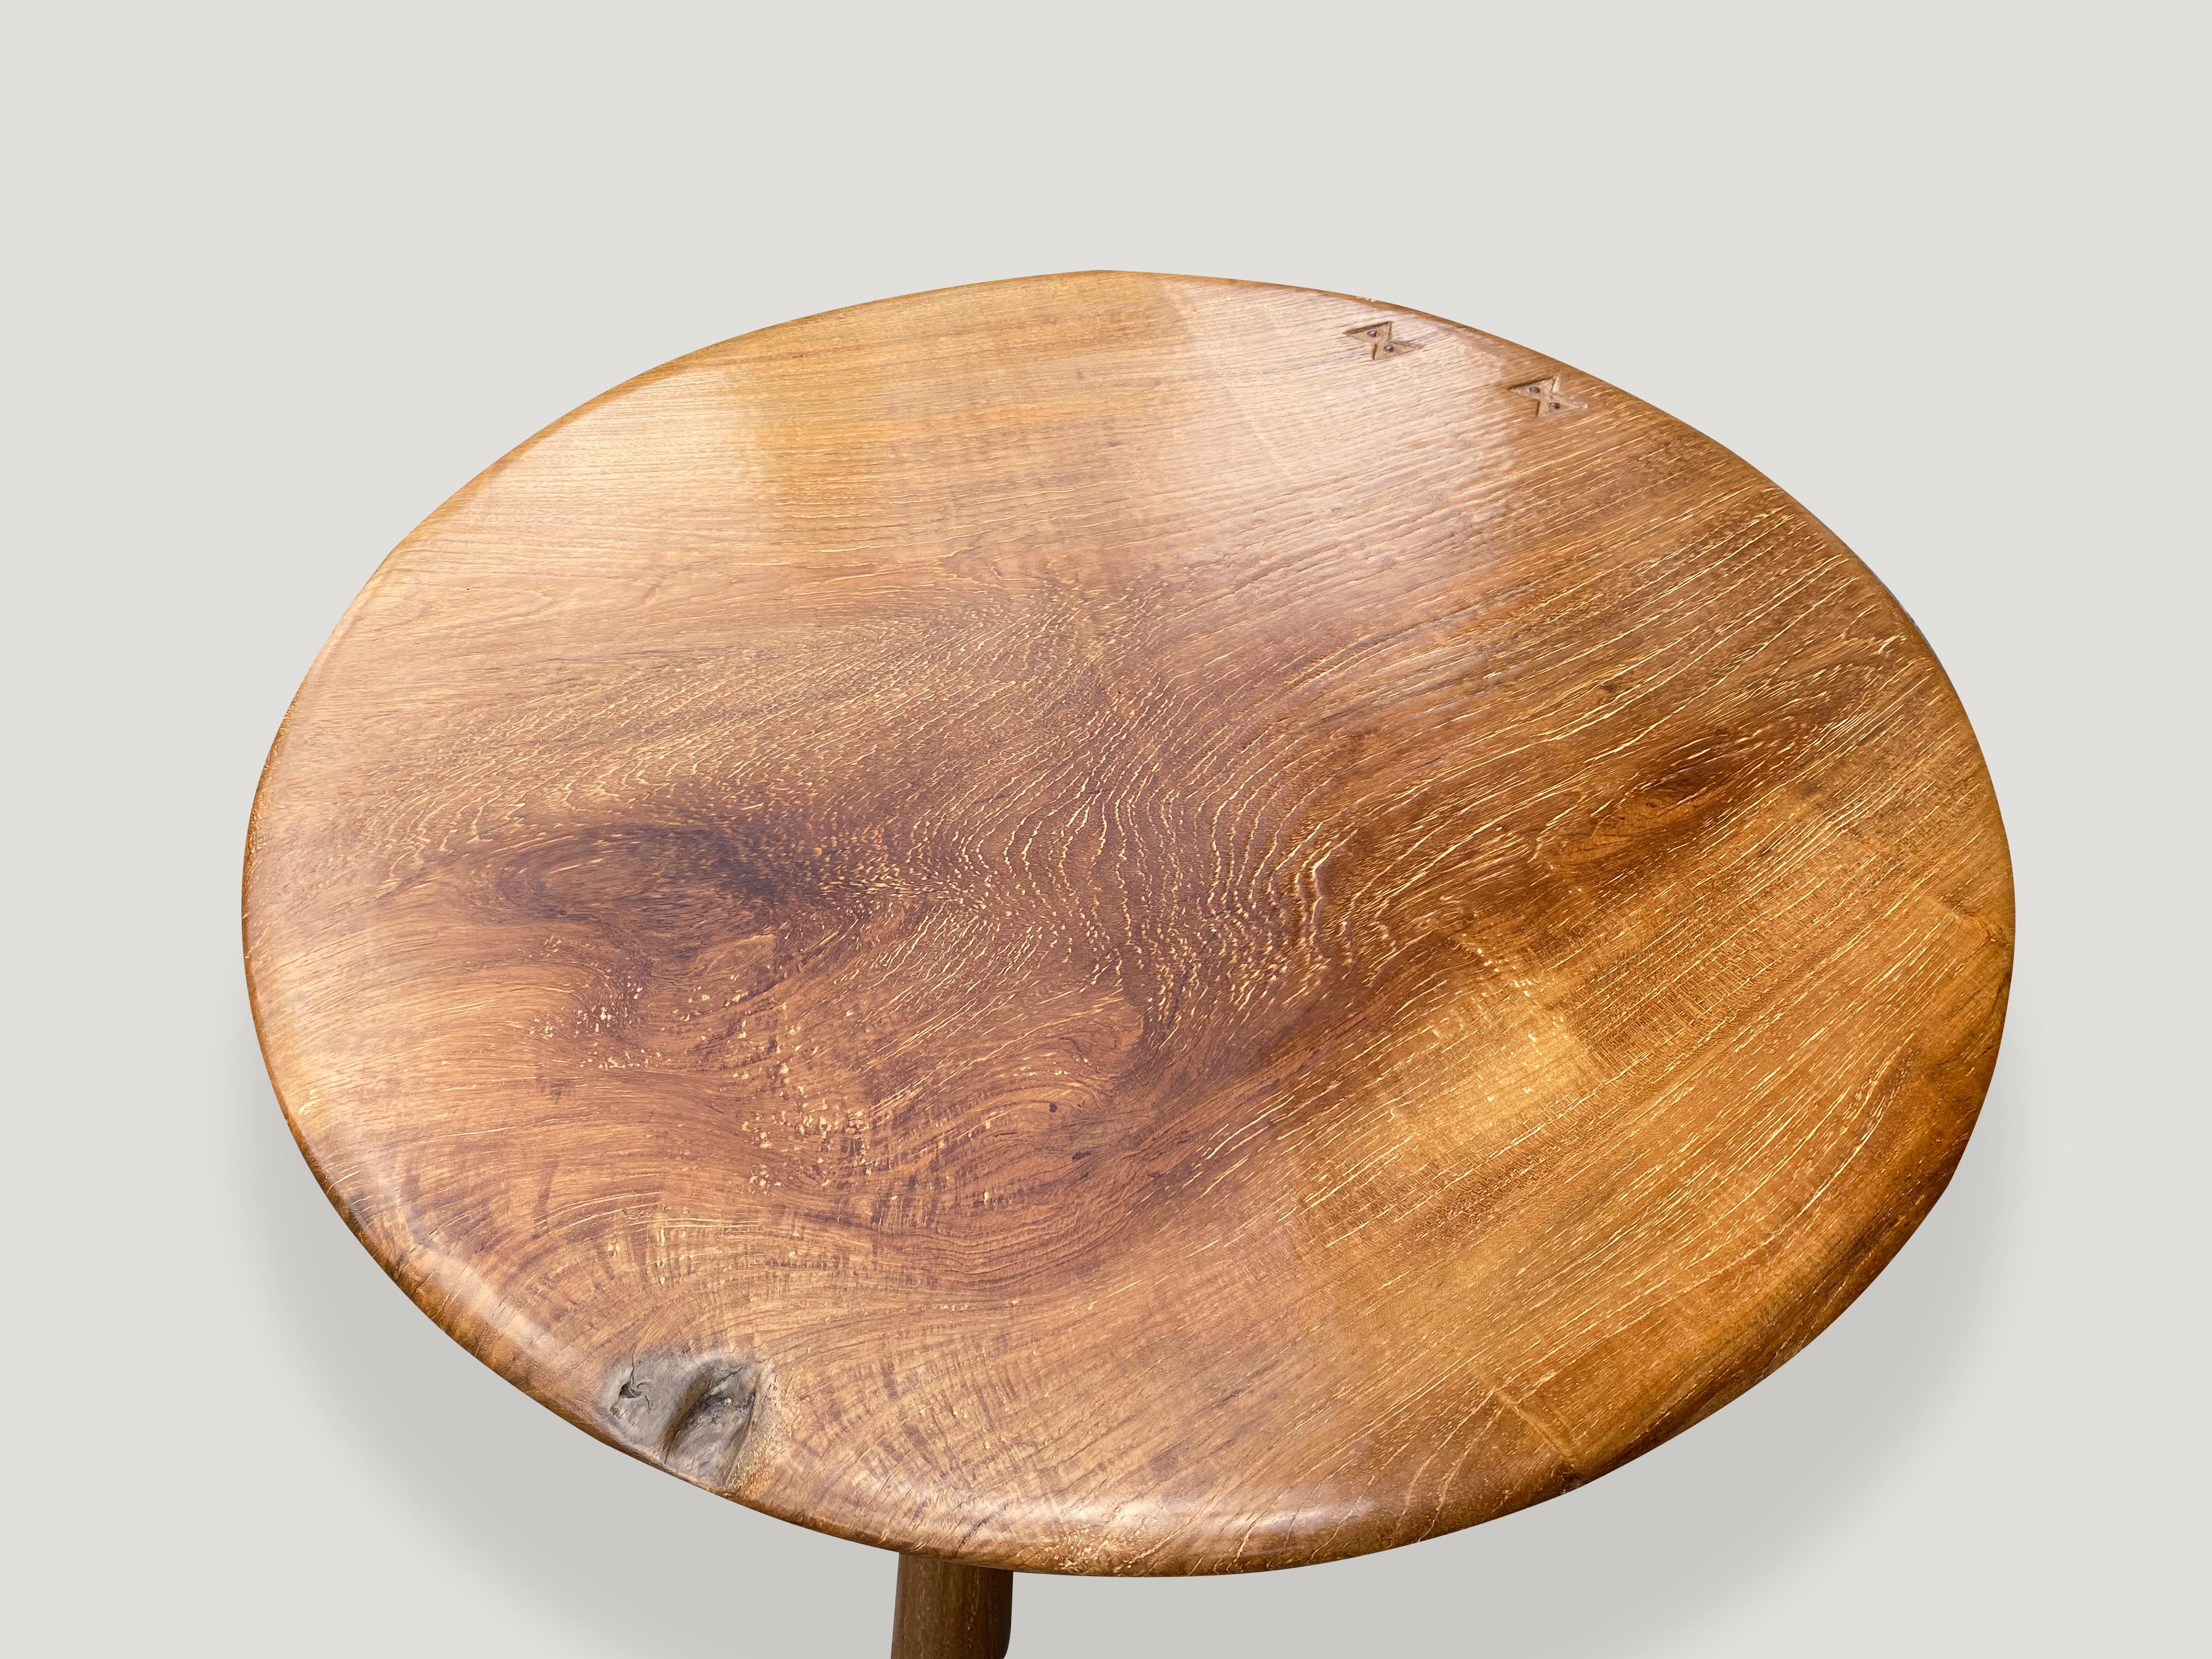 Andrianna Shamaris Midcentury Couture Round Teak Table with Butterflies Inlaid For Sale 2